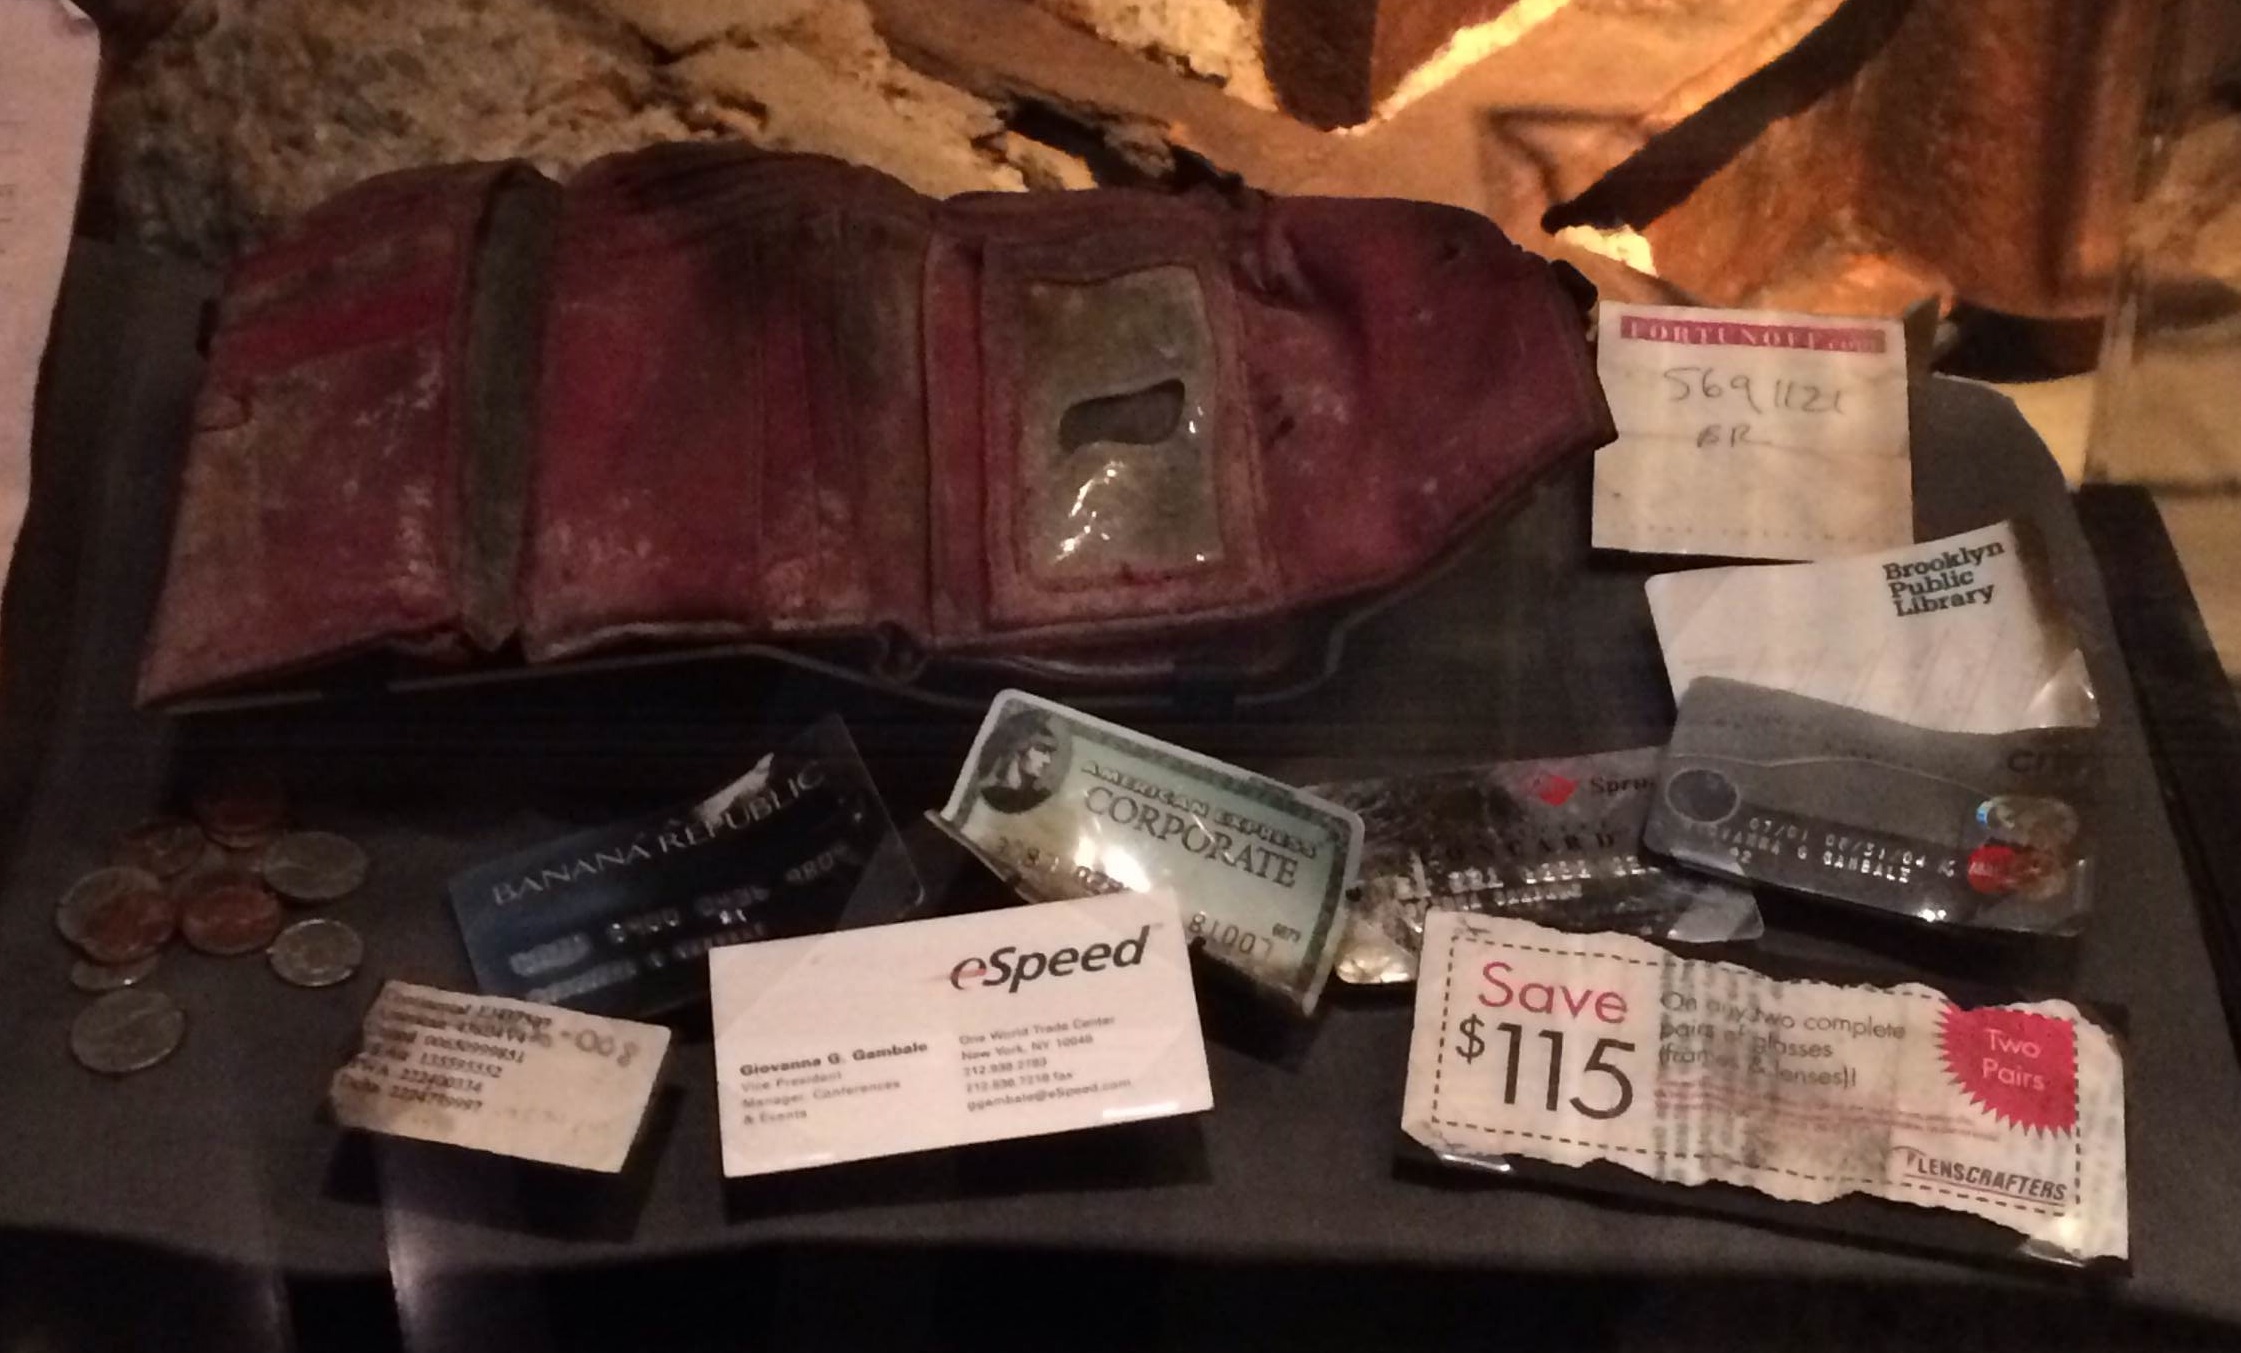 A wallet belonging to Giovanna Gambale is displayed at the Museum. The red wallet is heavily damaged and stained with dirt. The contents of the wallet, including credit cards, coupons, note paper, and coins have been laid out in front of it.